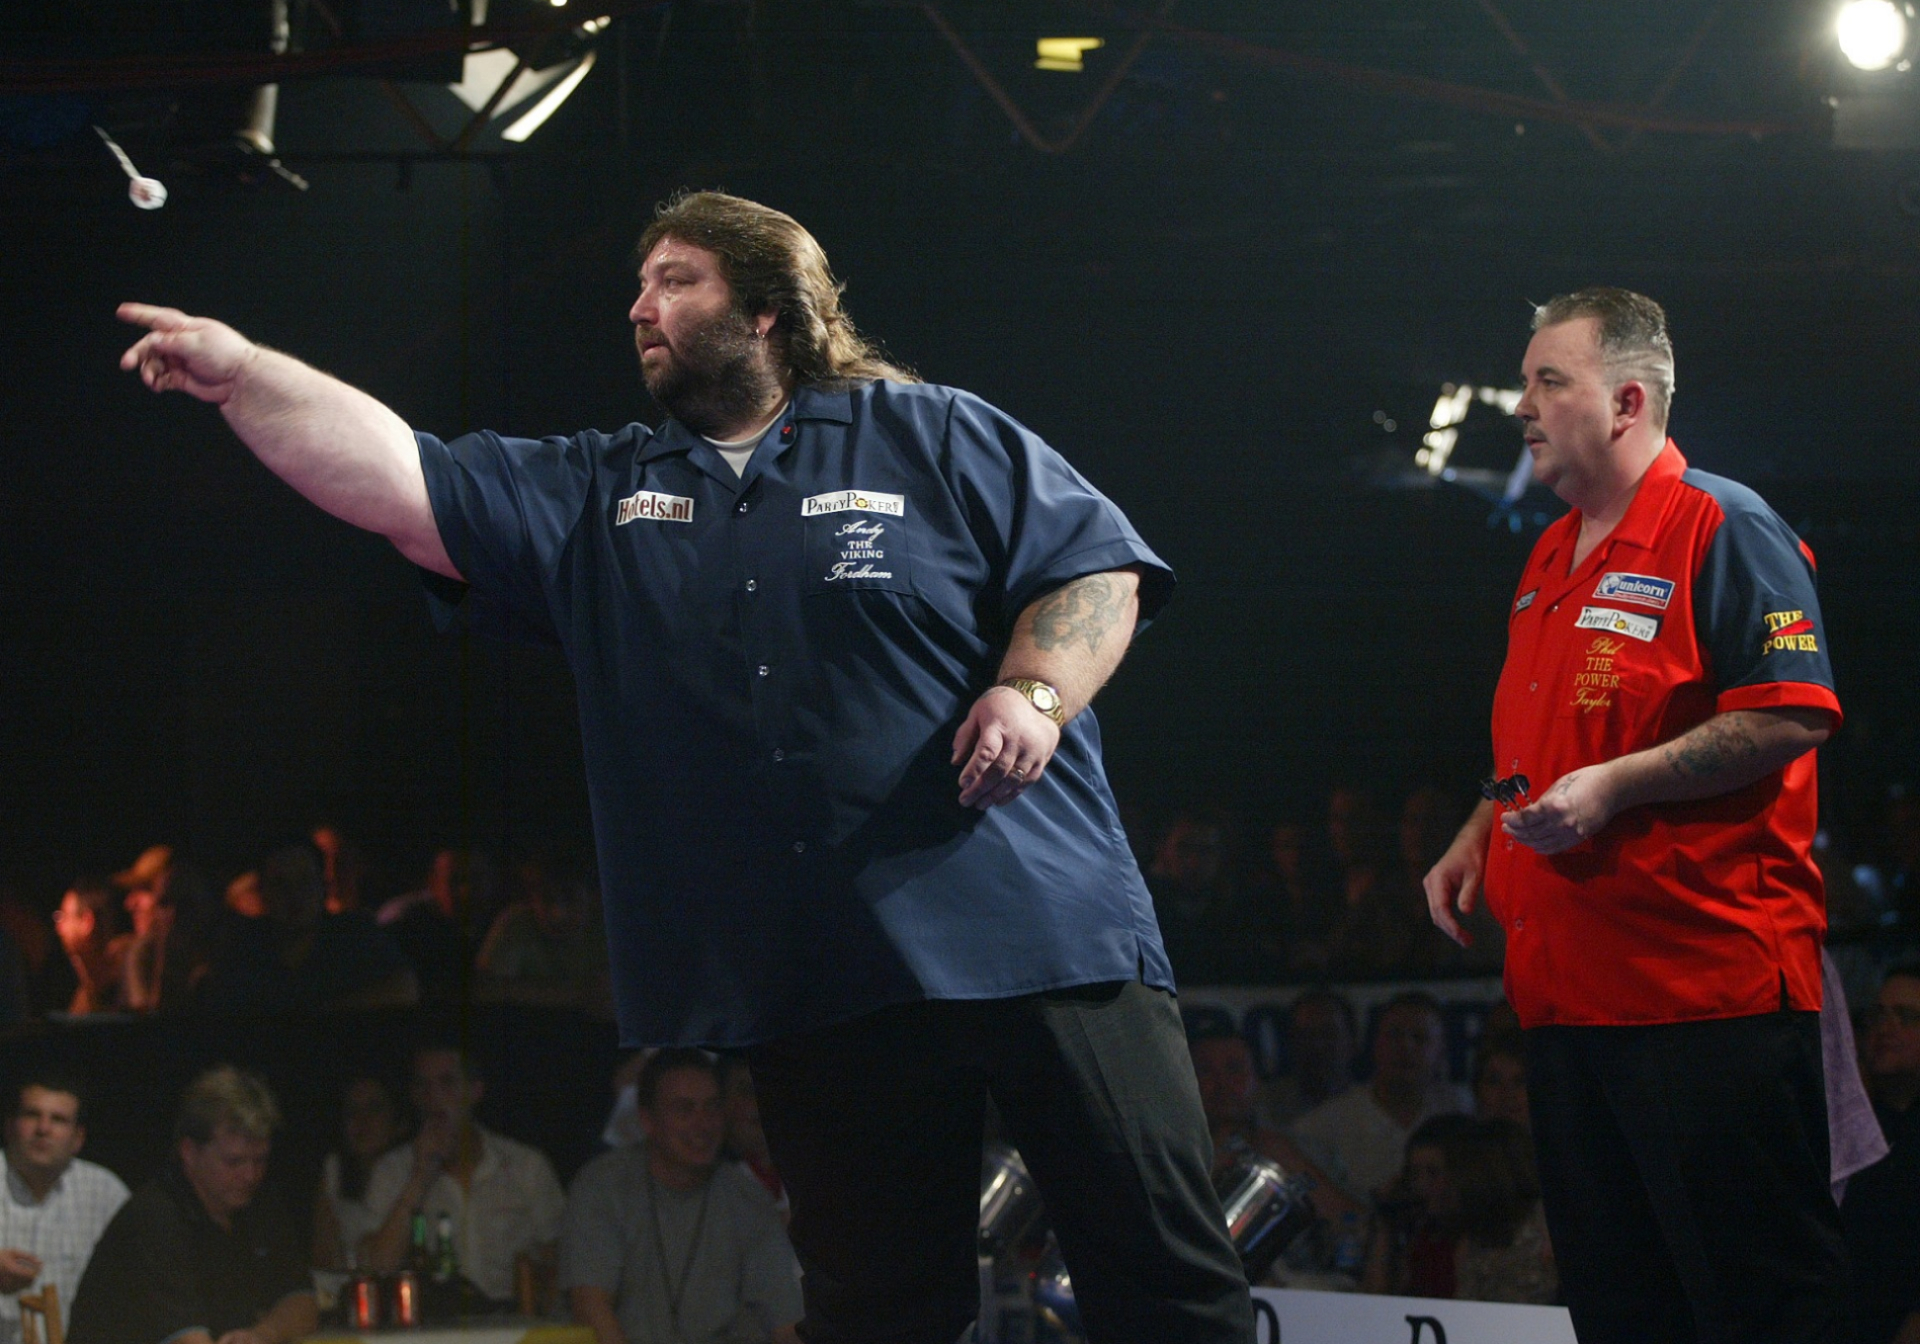 Andy Fordham & Phil Taylor (Lawrence Lustig, PDC)